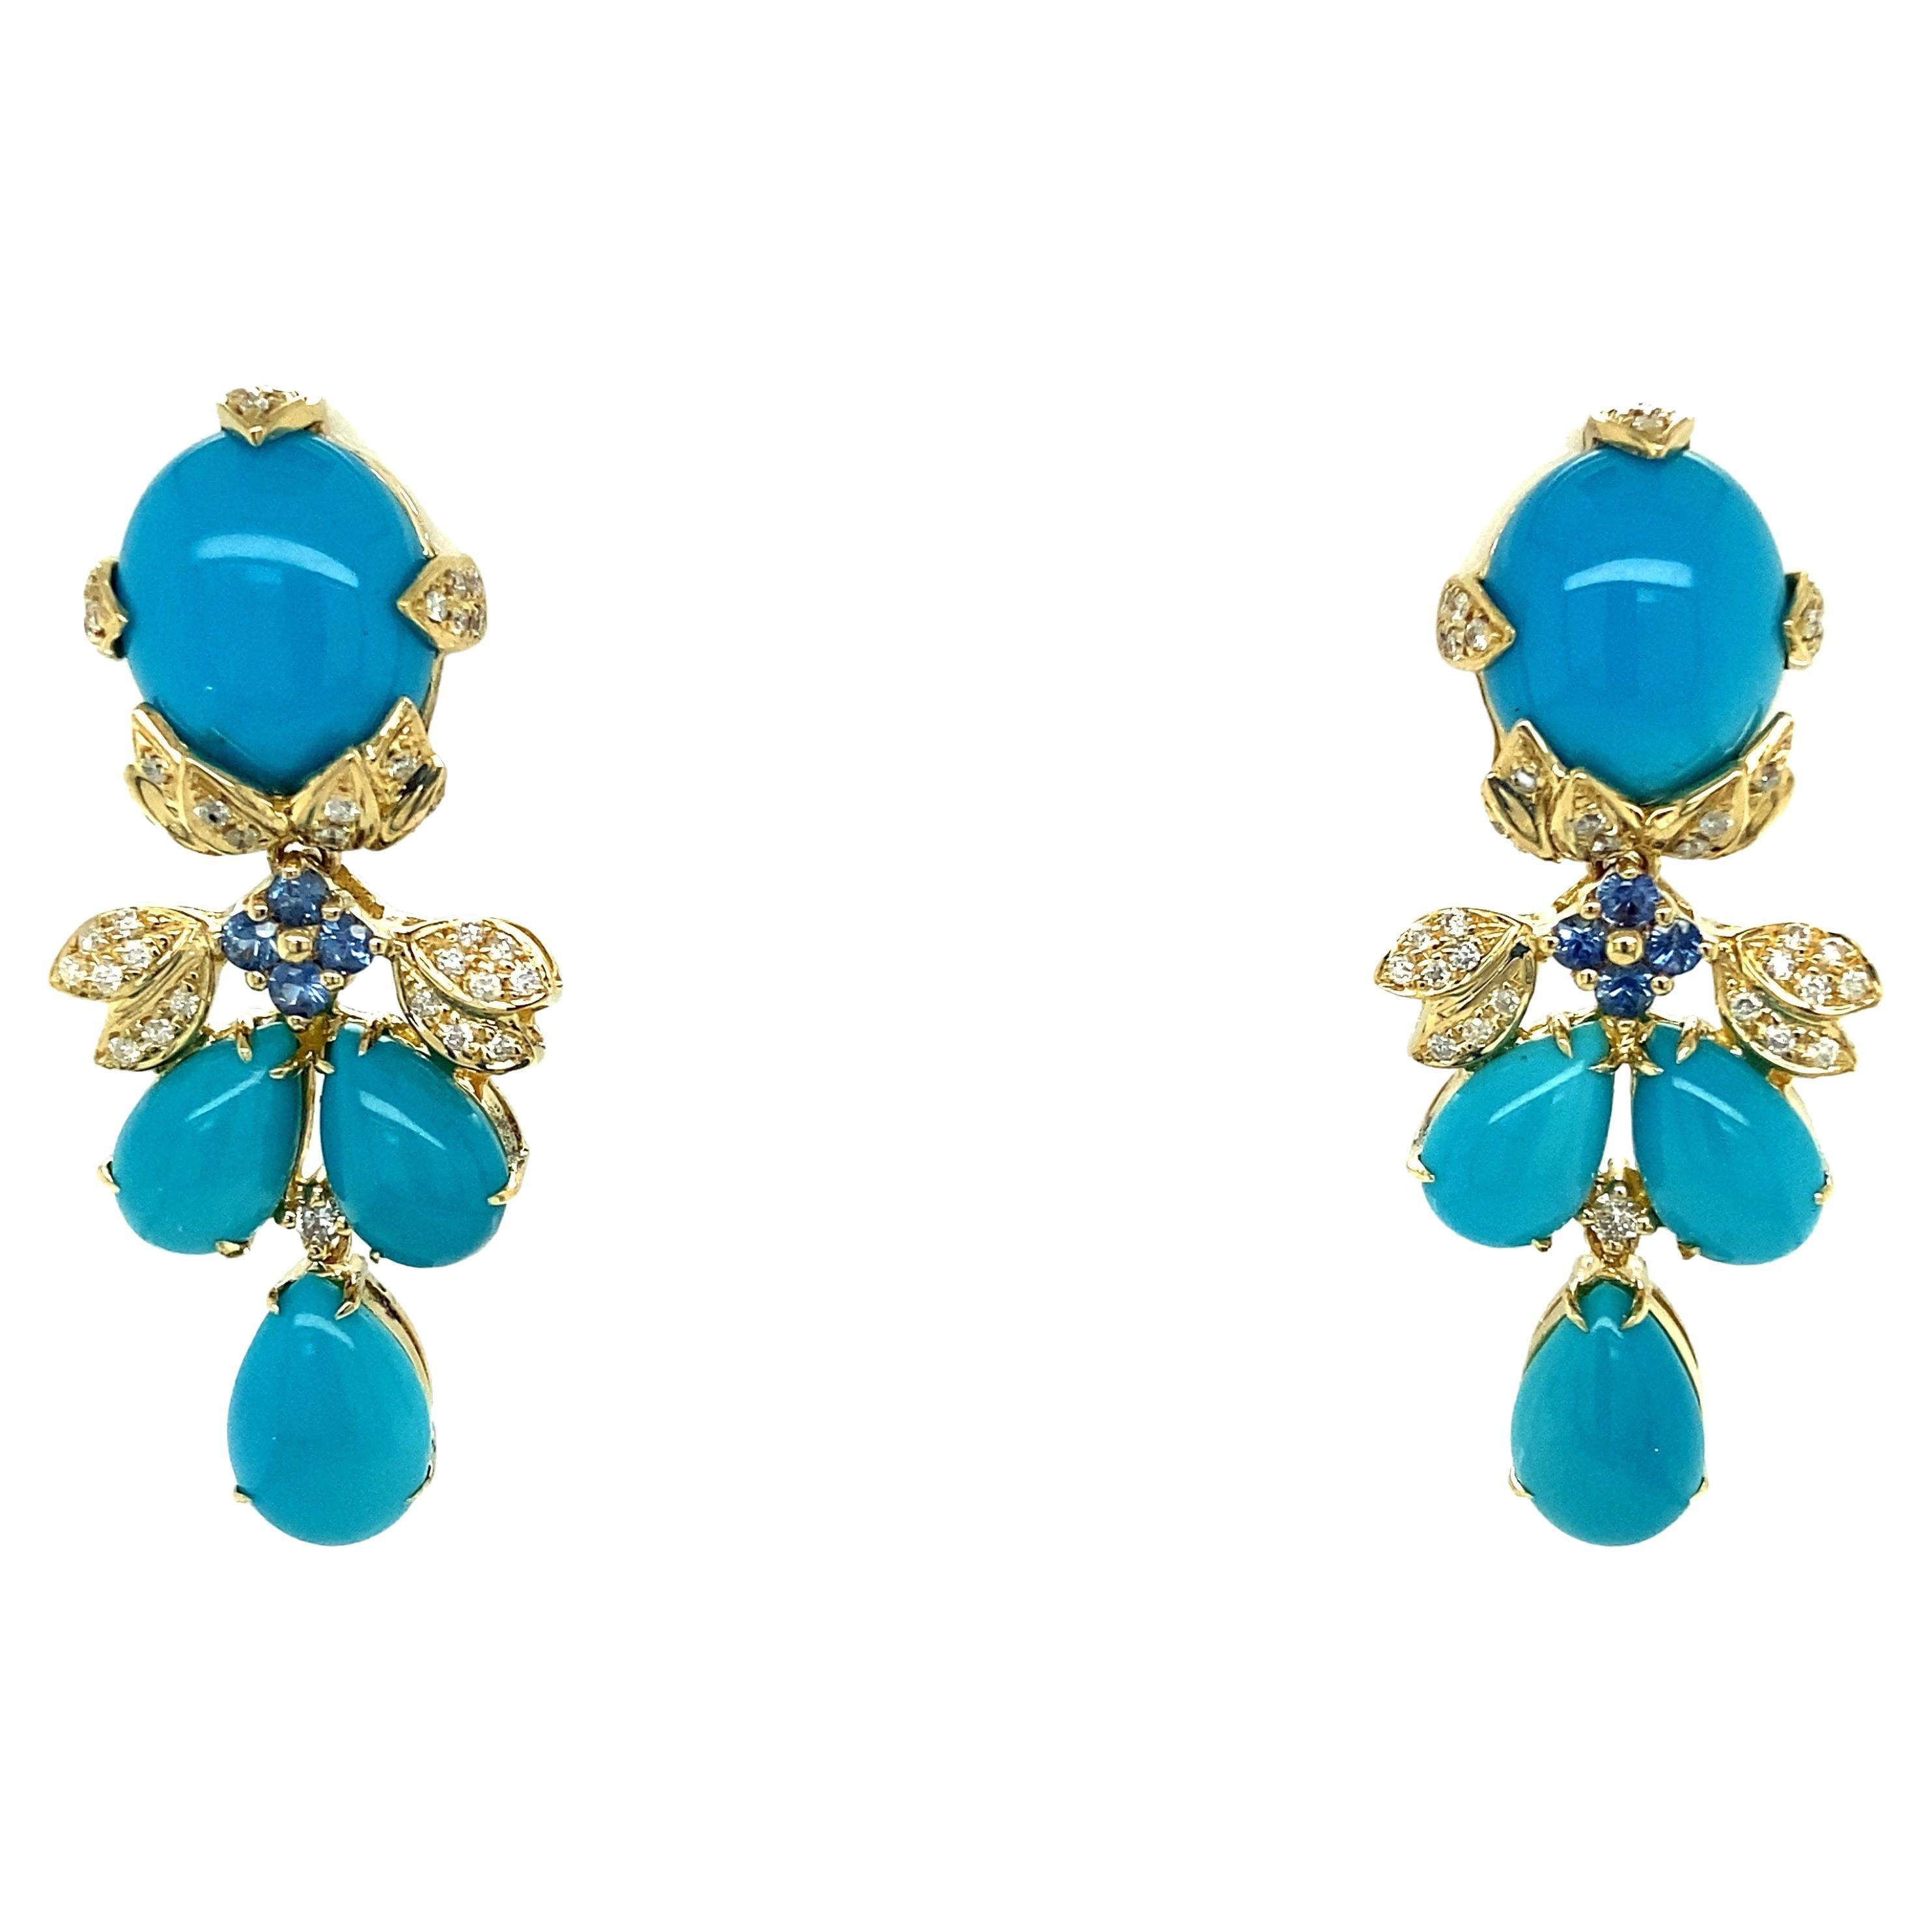 Persian Turquoise, Sapphire and Diamond Earrings in 18 Karat Gold, 1980s